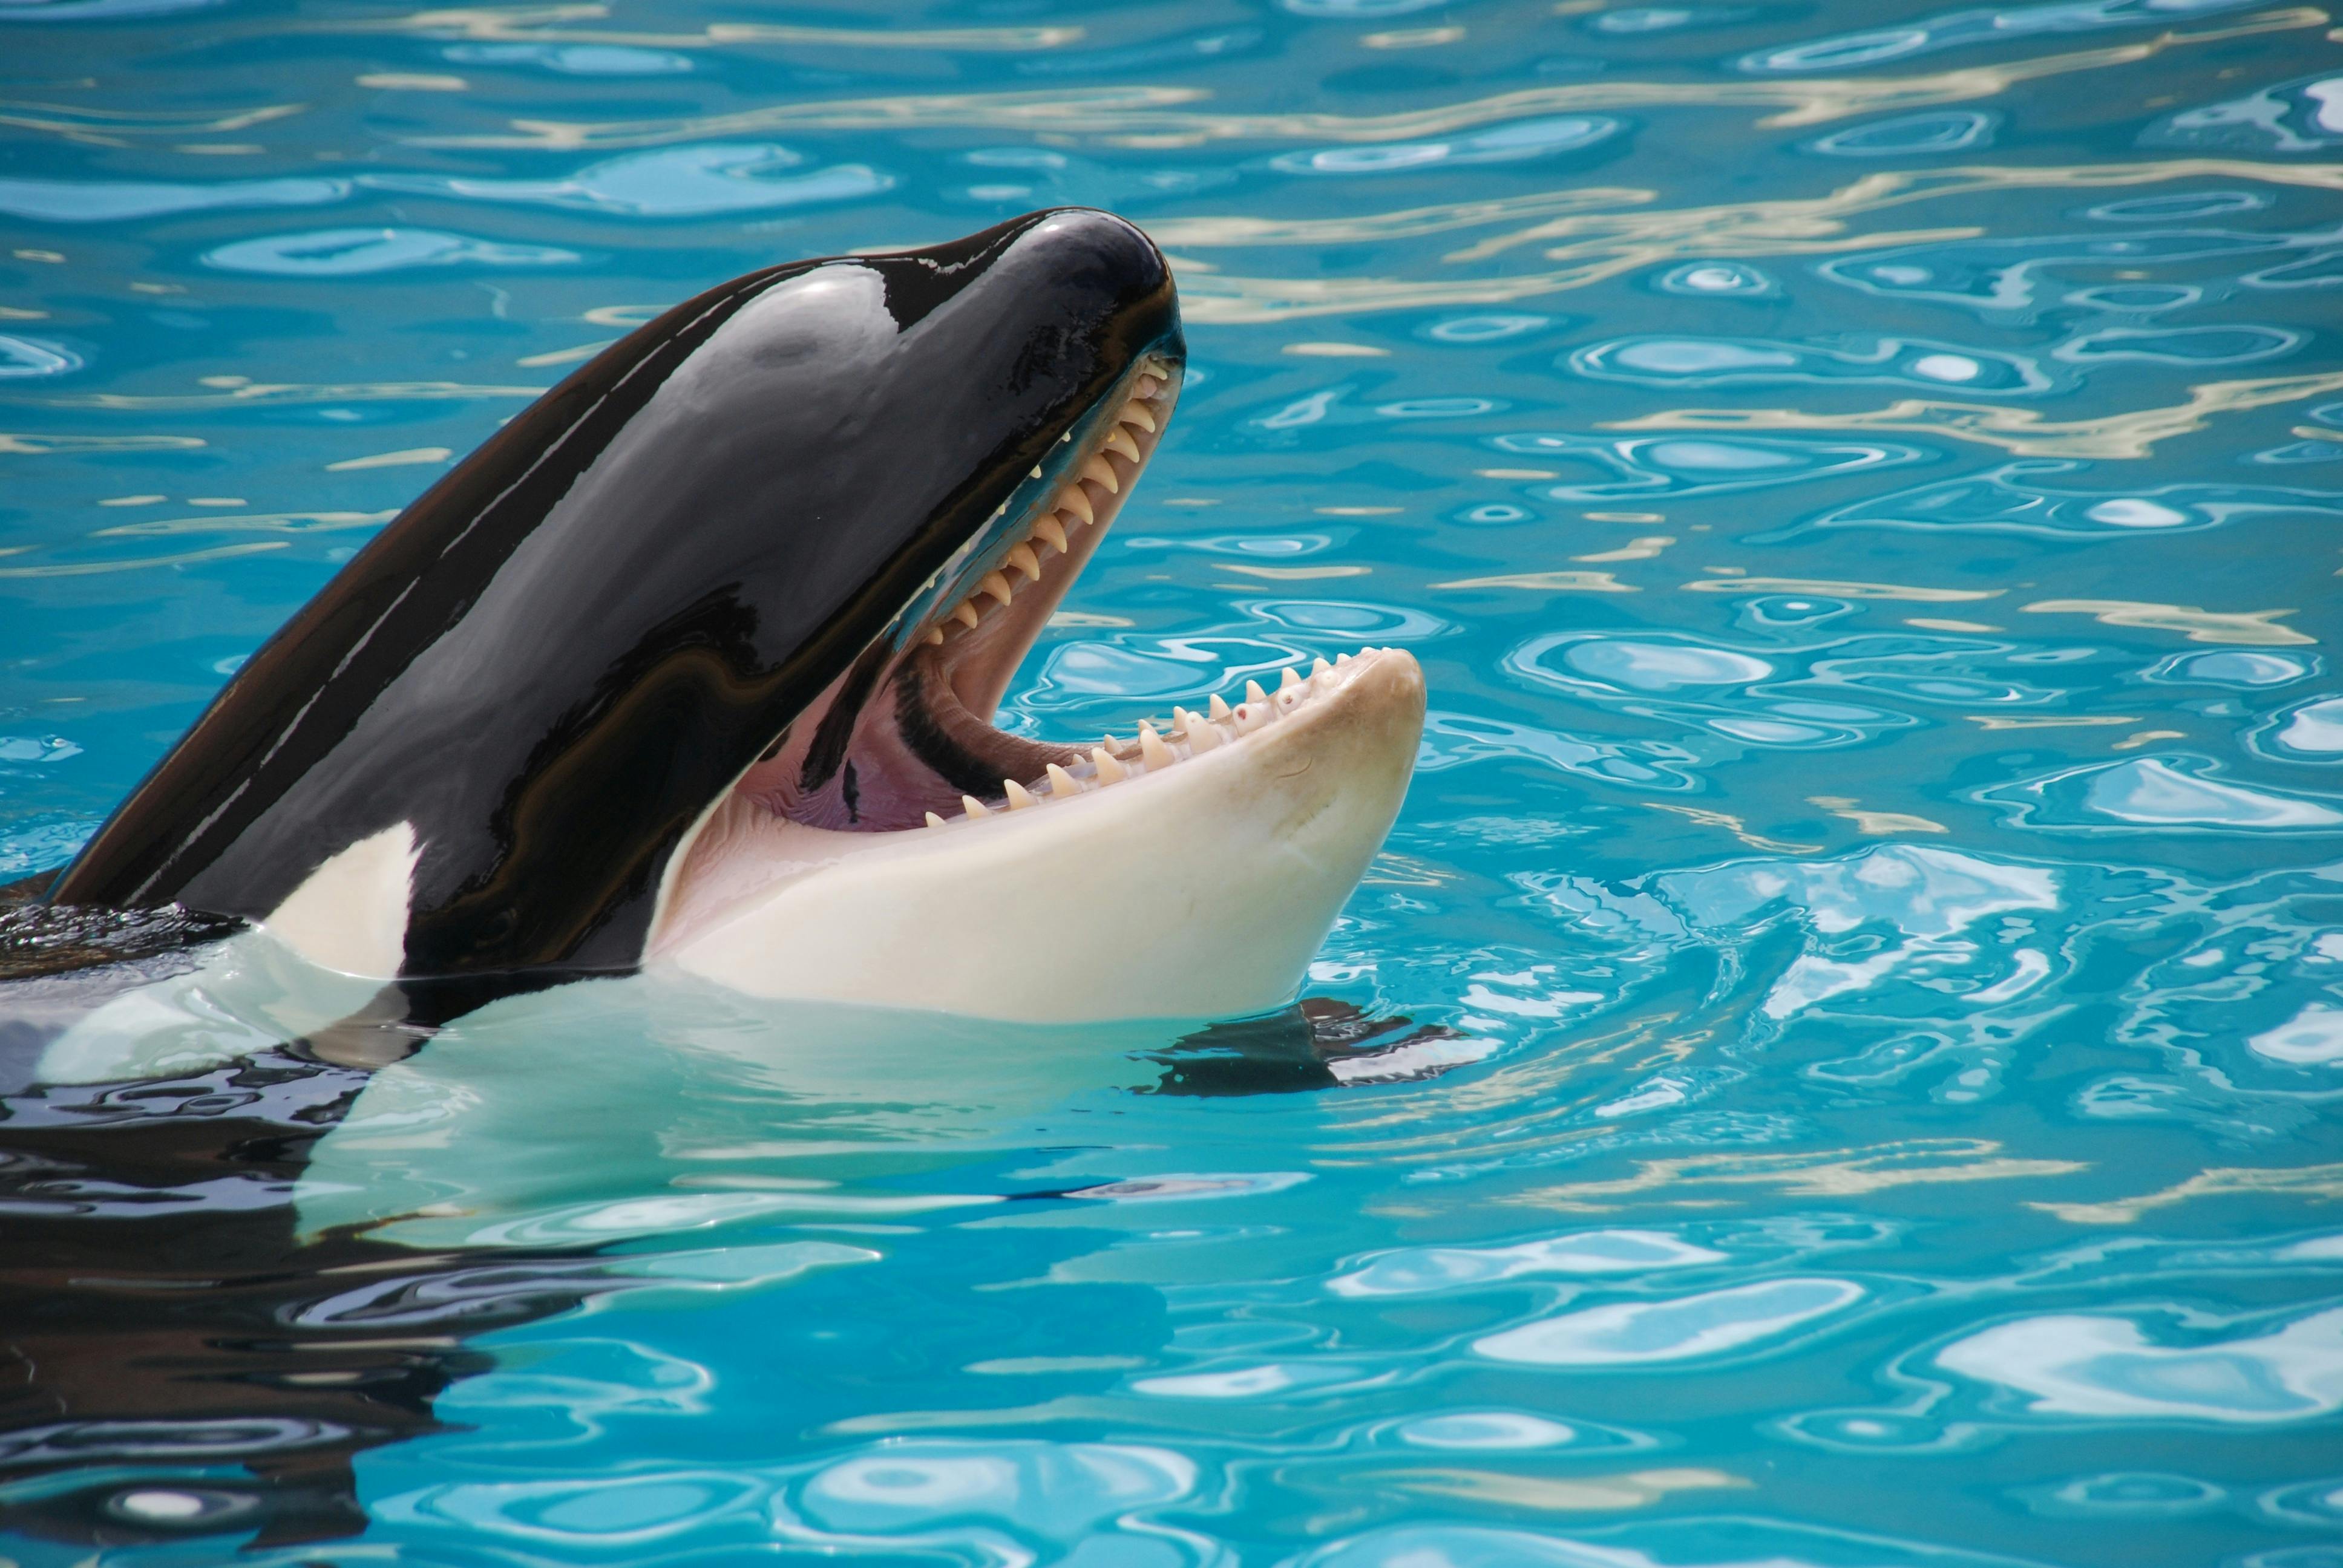 Creepy Recording Of Orcas Imitating Human Speech Leaves People Amazed But Terrified